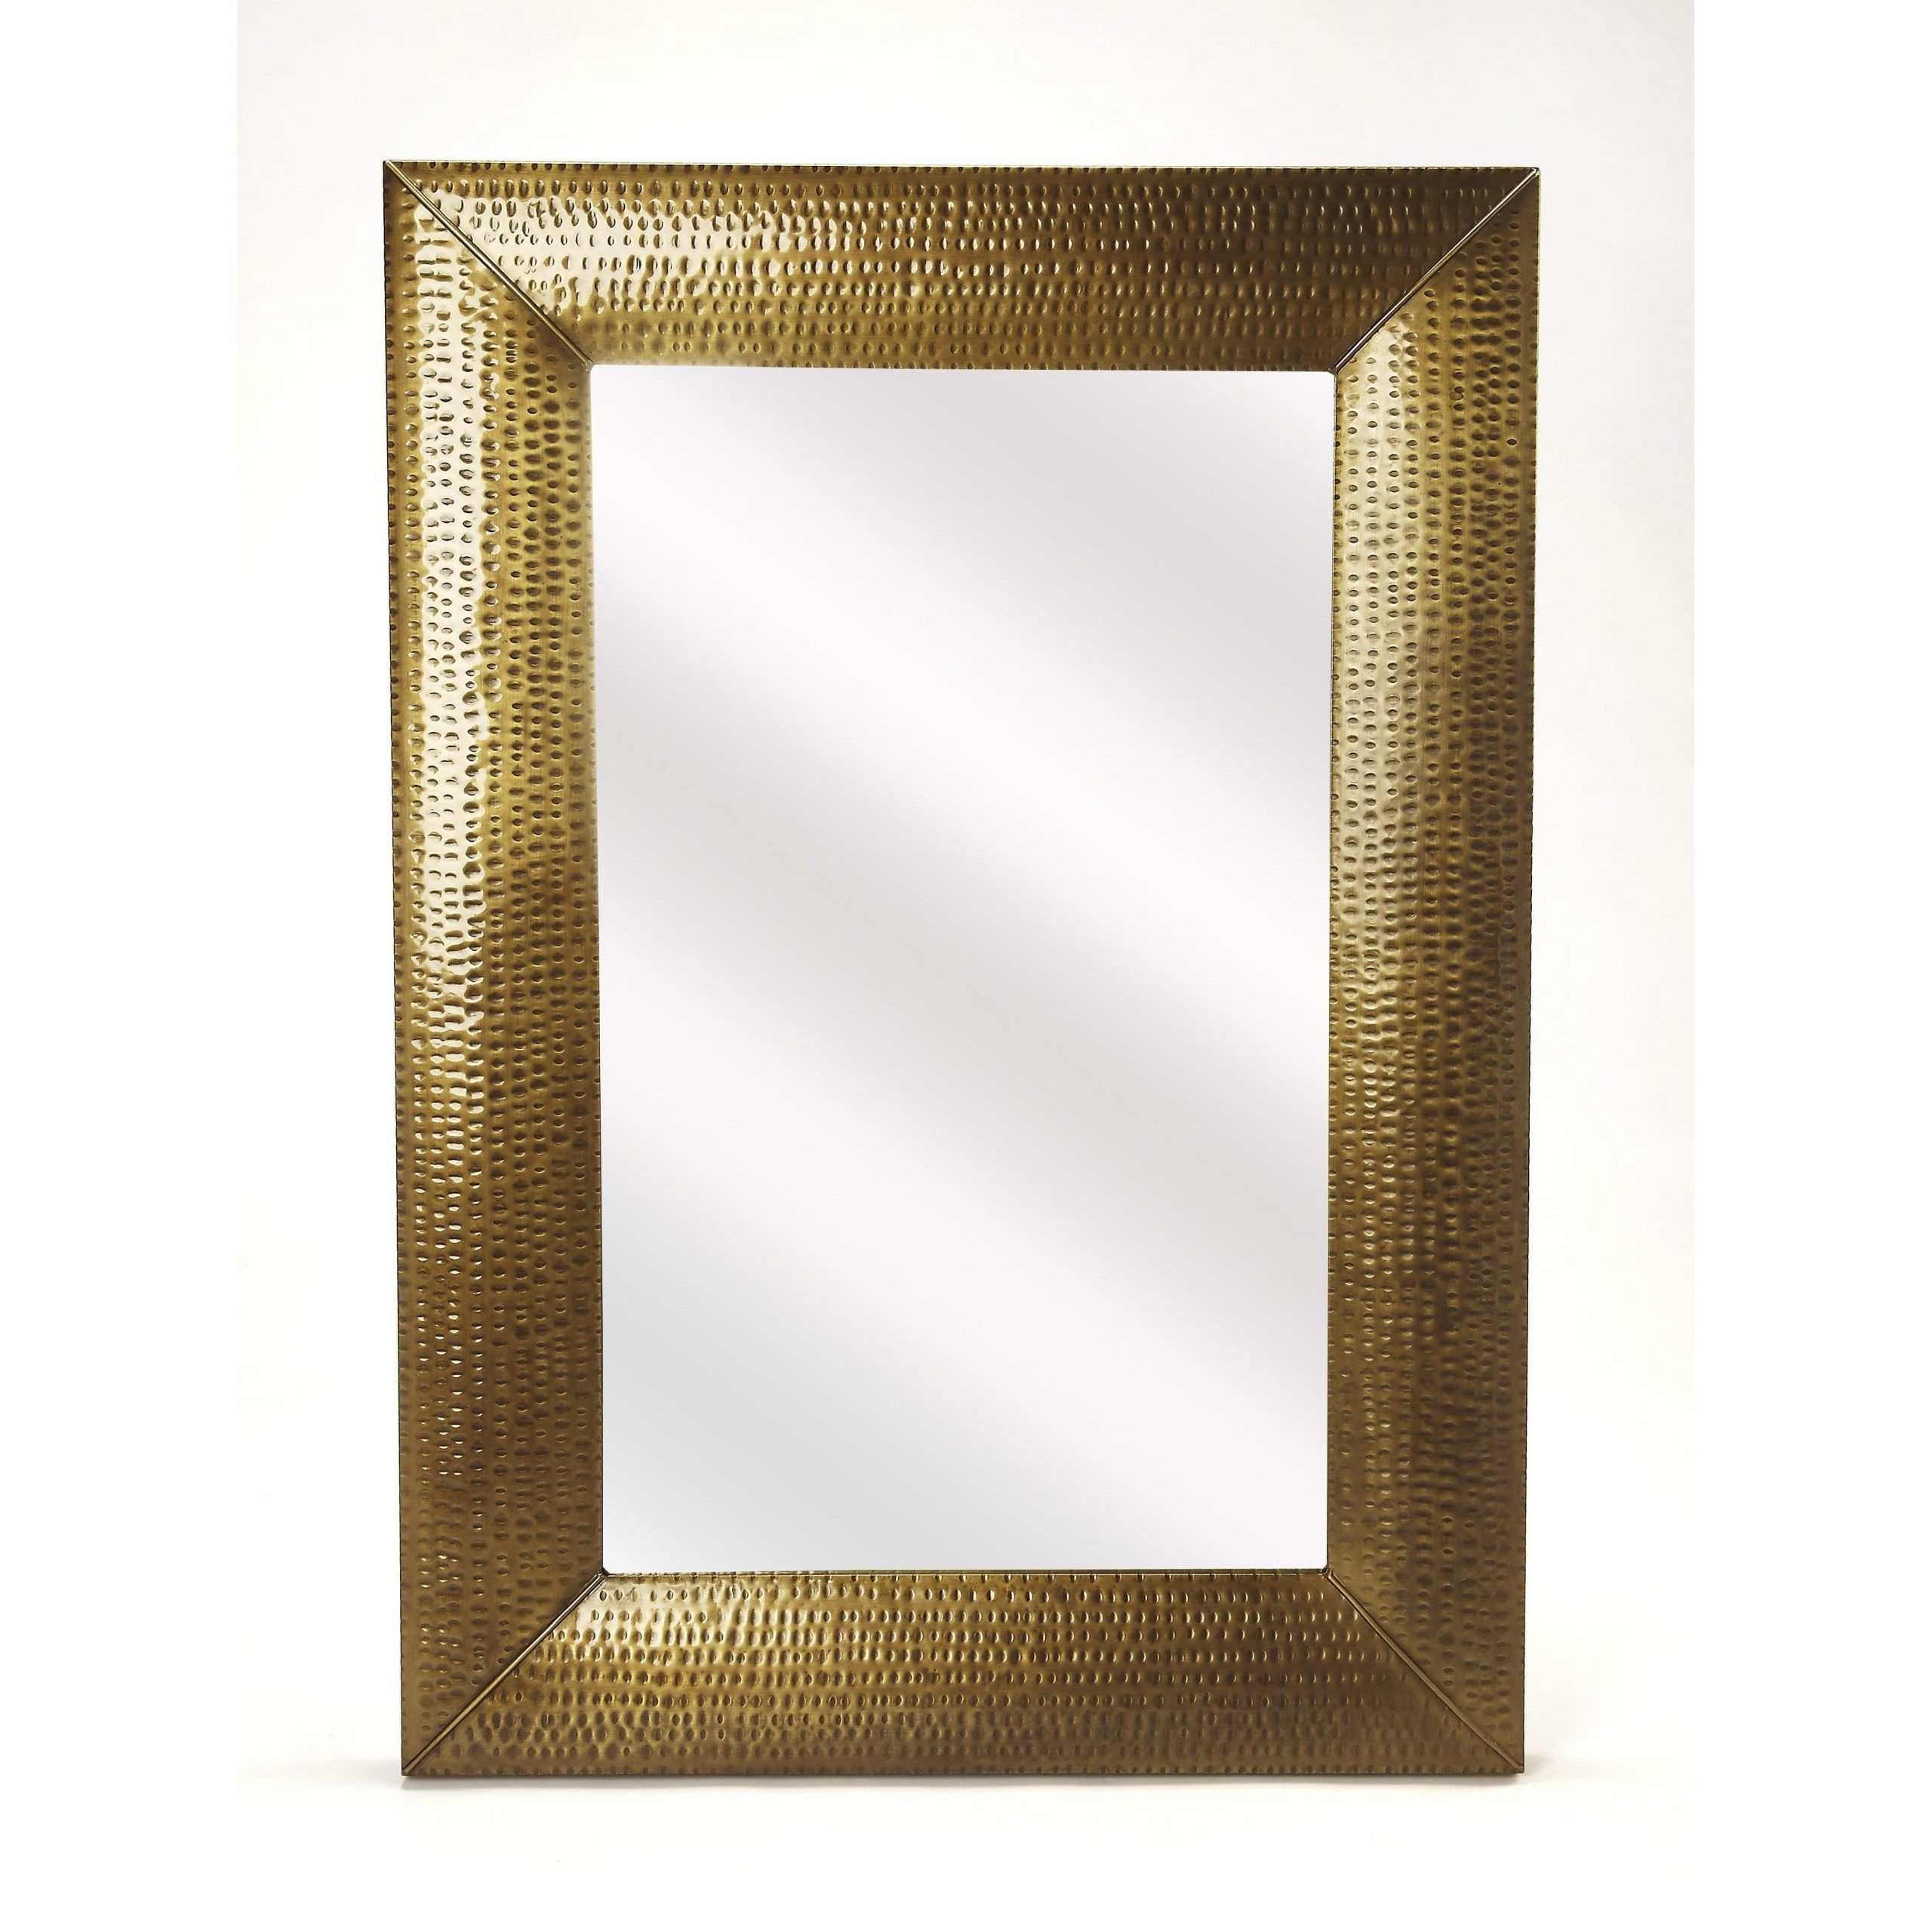 Butler Lehigh Hammered Gold Wall Mirror 4308226 Size: 33"w, 2"d, 47"h Throughout Dandre Wall Mirrors (Photo 7 of 15)